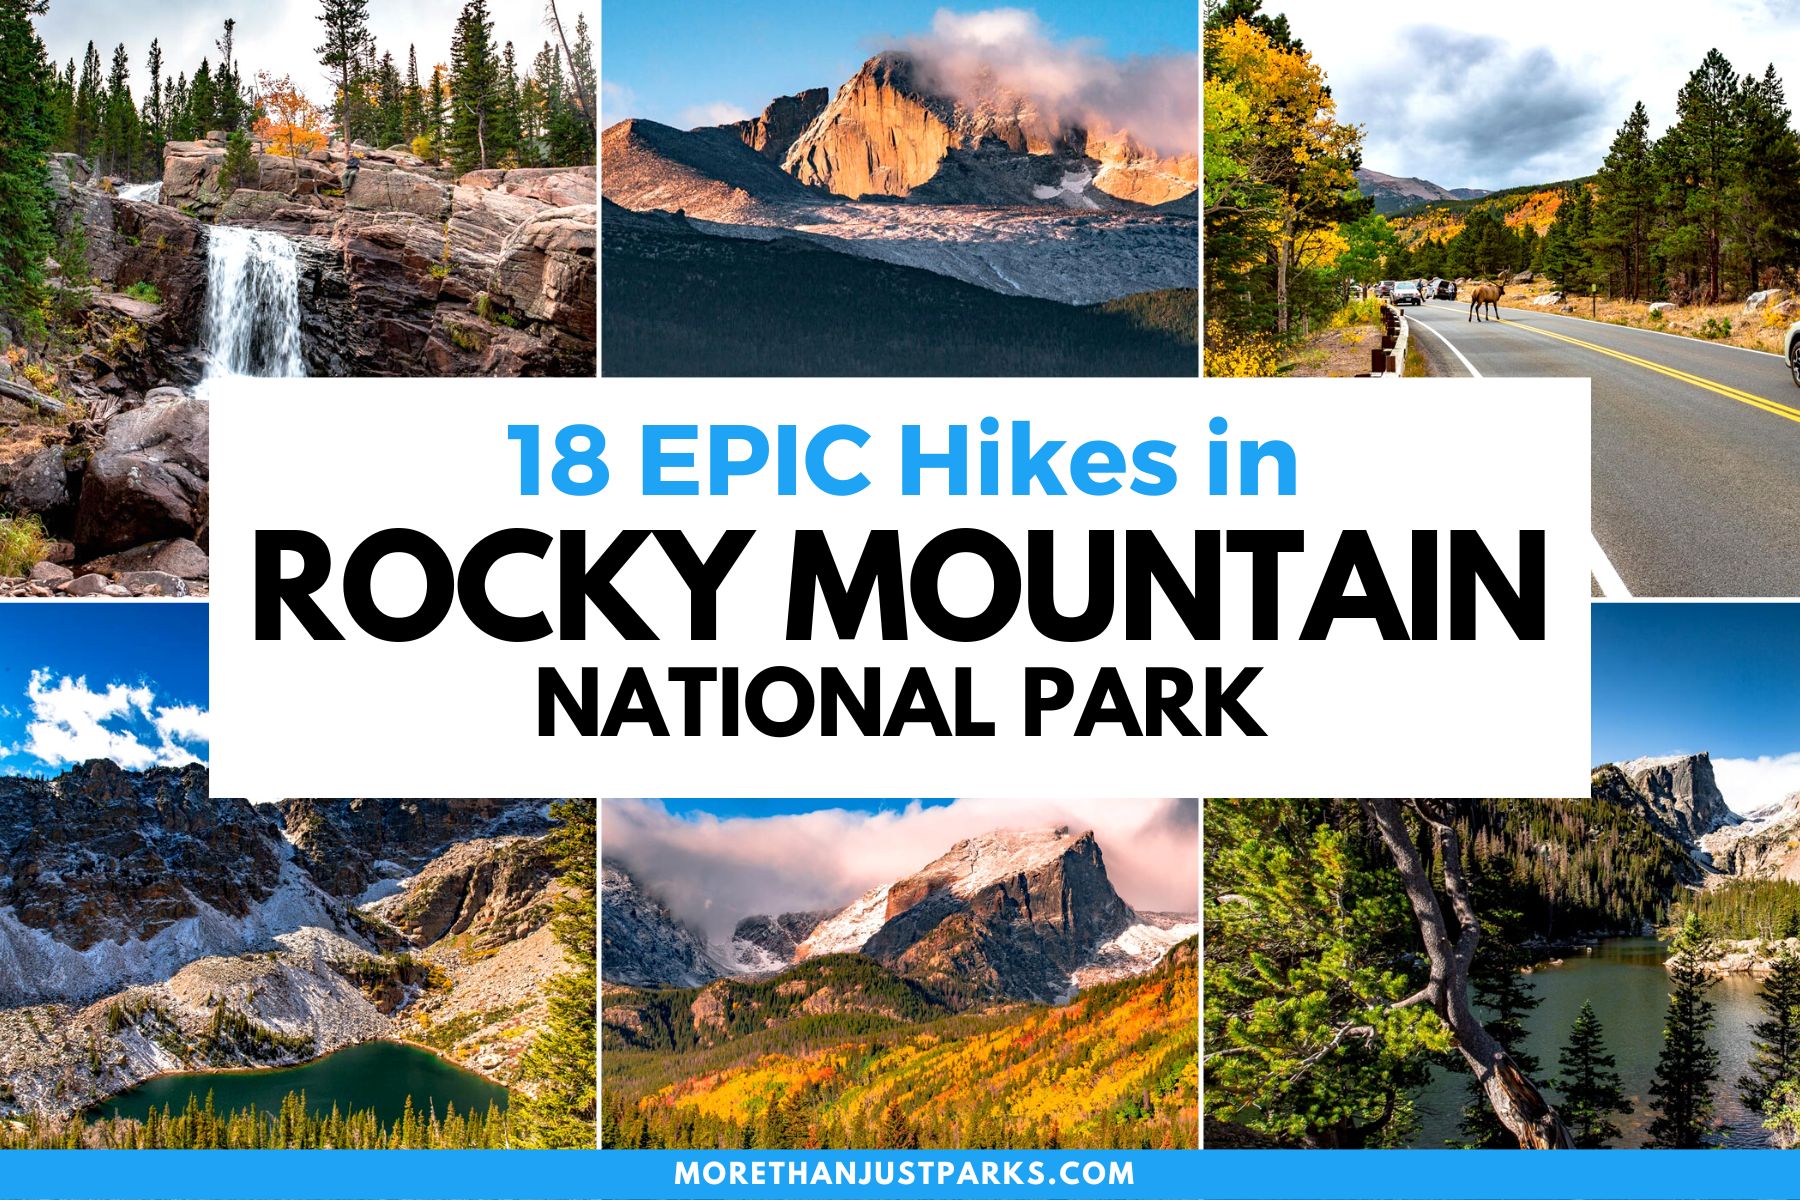 best hikes rocky mountain national park colorado, epic trails rocky mountain national park